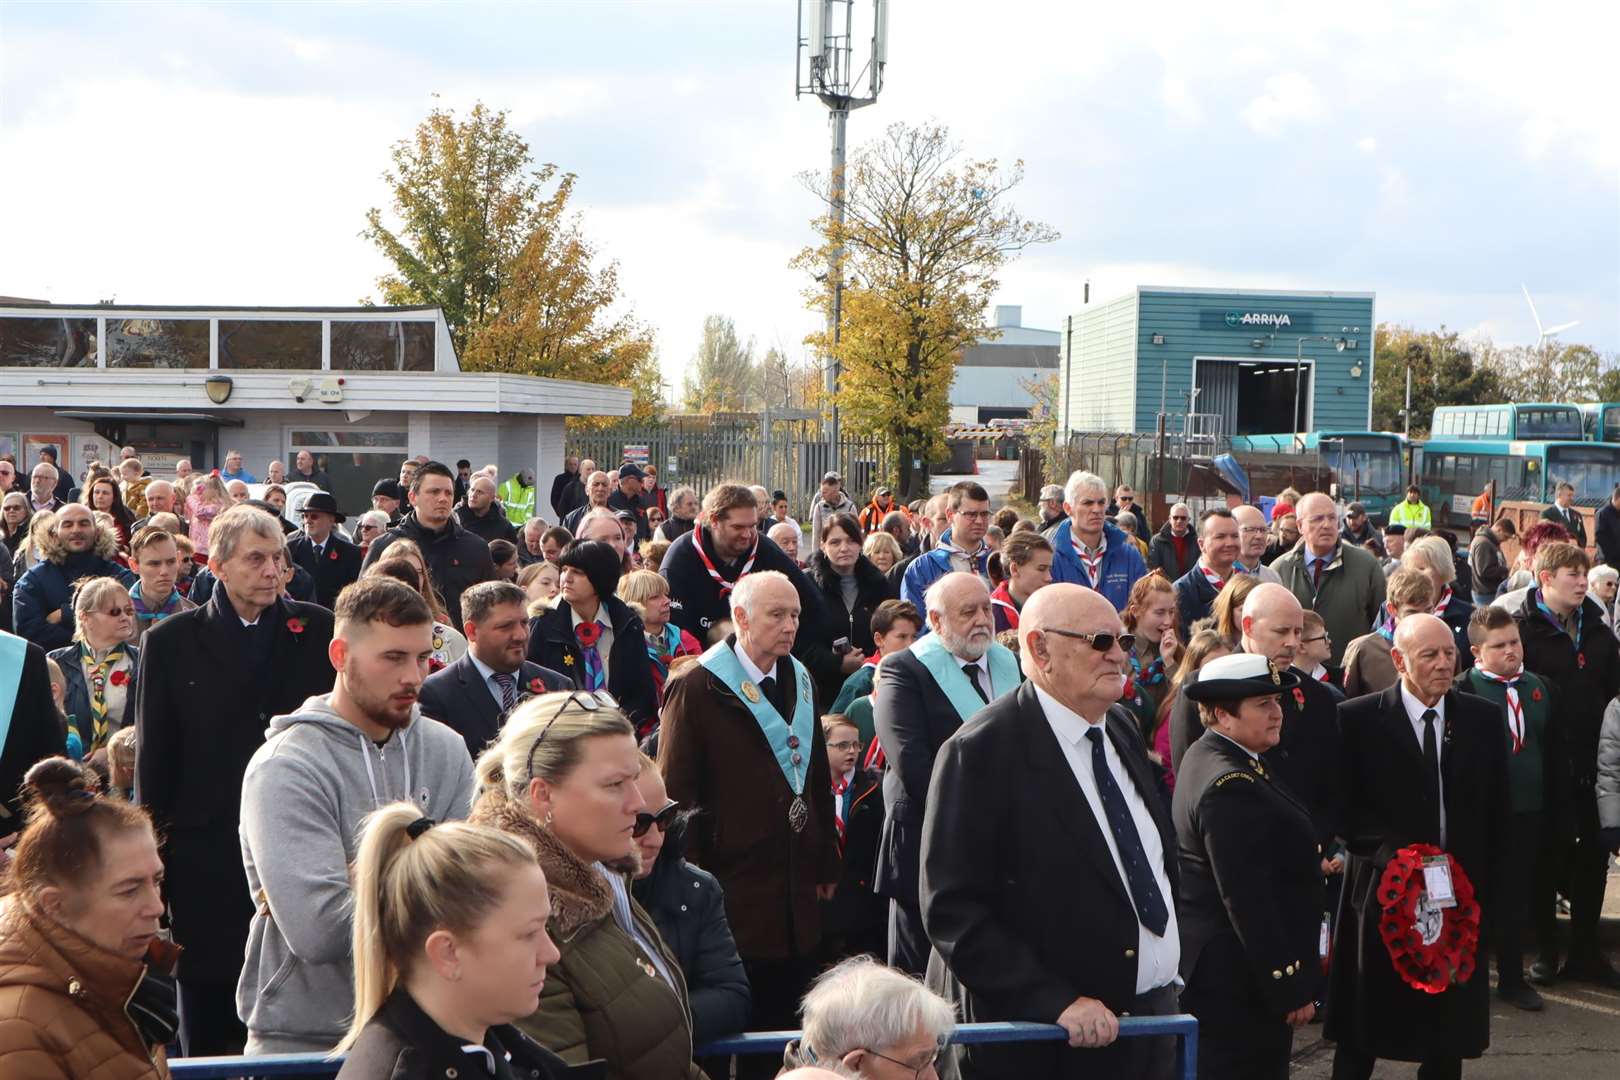 Crowds at the Remembrance Sunday service at Sheerness war memorial (21306265)